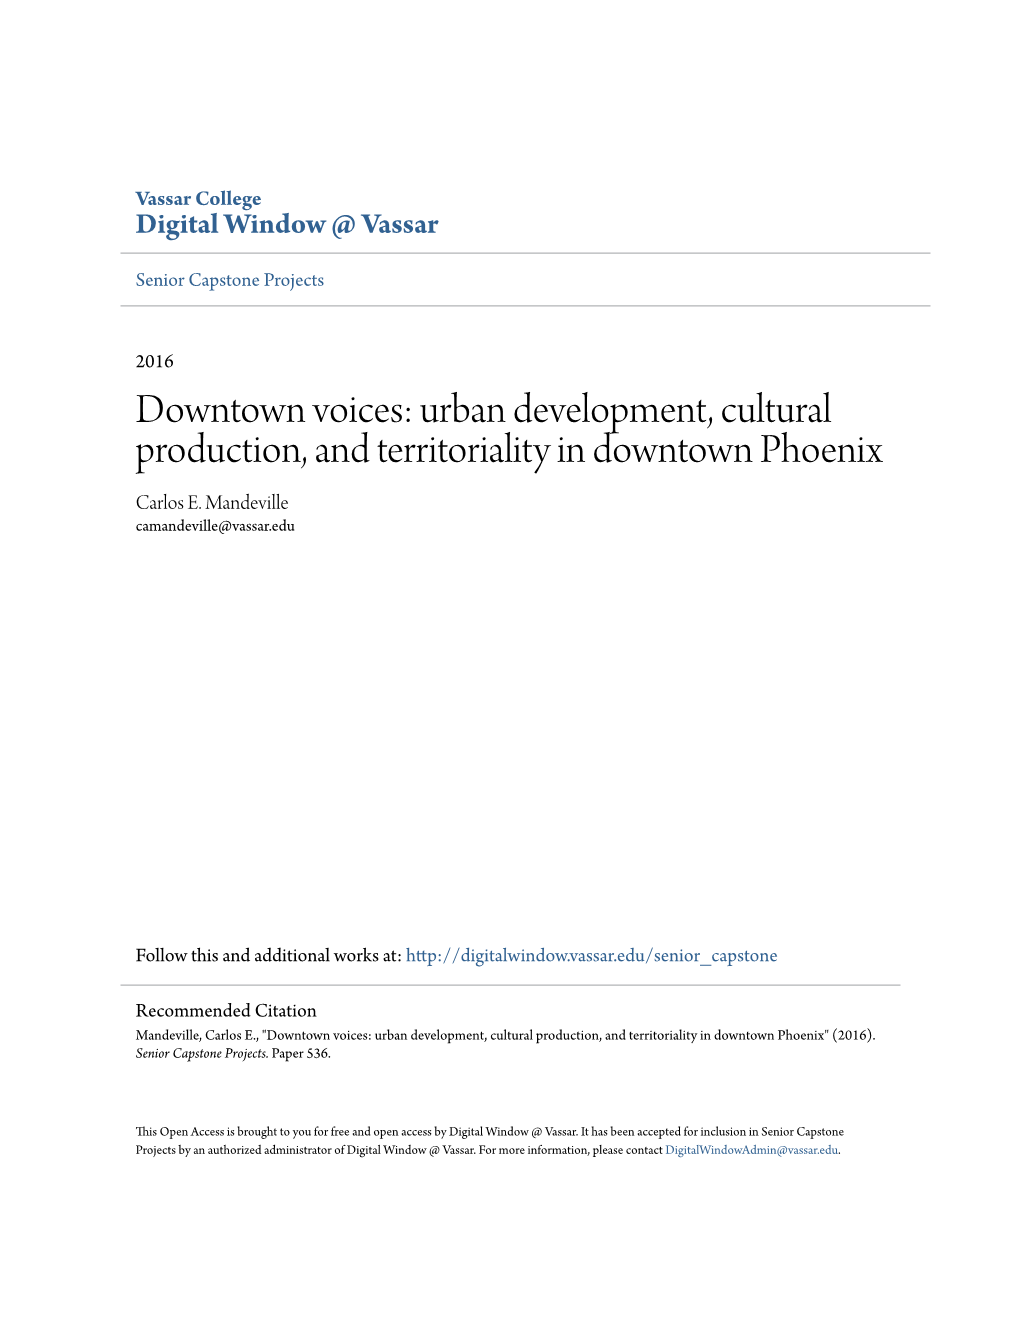 Downtown Voices: Urban Development, Cultural Production, and Territoriality in Downtown Phoenix Carlos E